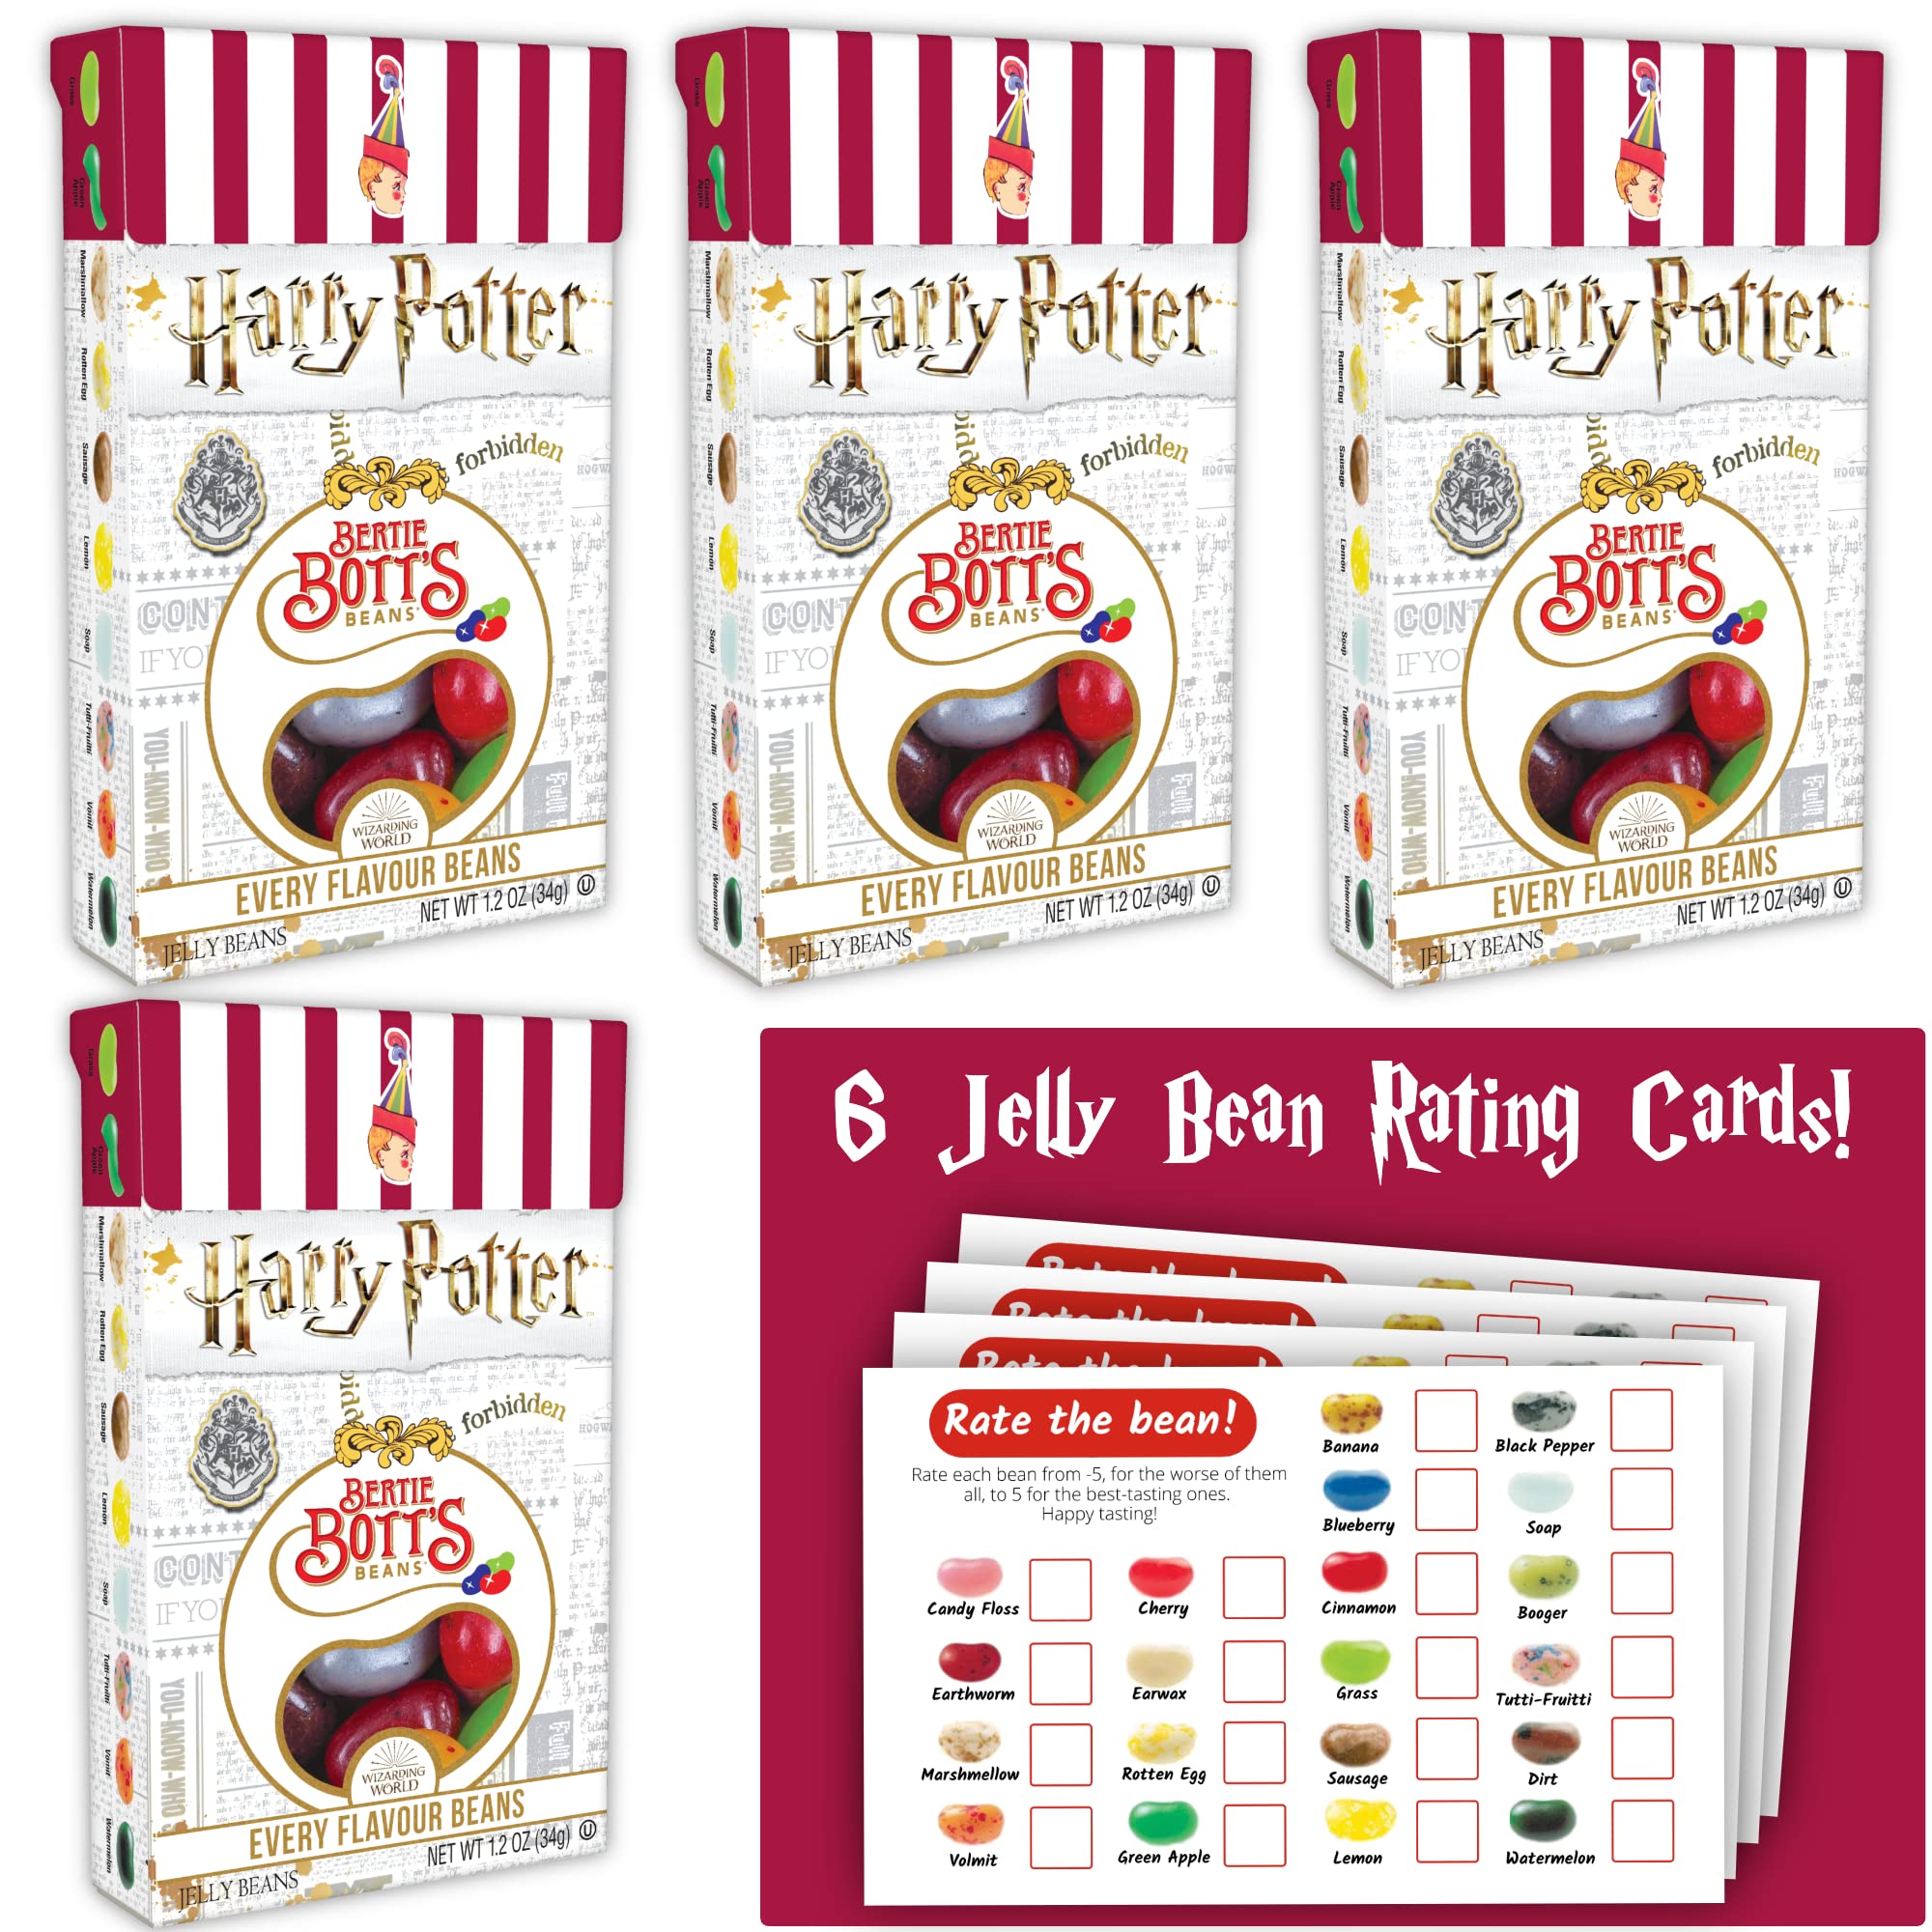 Jelly Belly Harry Potter Jelly Beans - Harry Potter Candy - 1.2 oz. Bertie  Botts Every Flavored Beans (4 ct) + Gaudum Bertie Botts Jelly Bean rating  cards (6 ct) Small Bundle